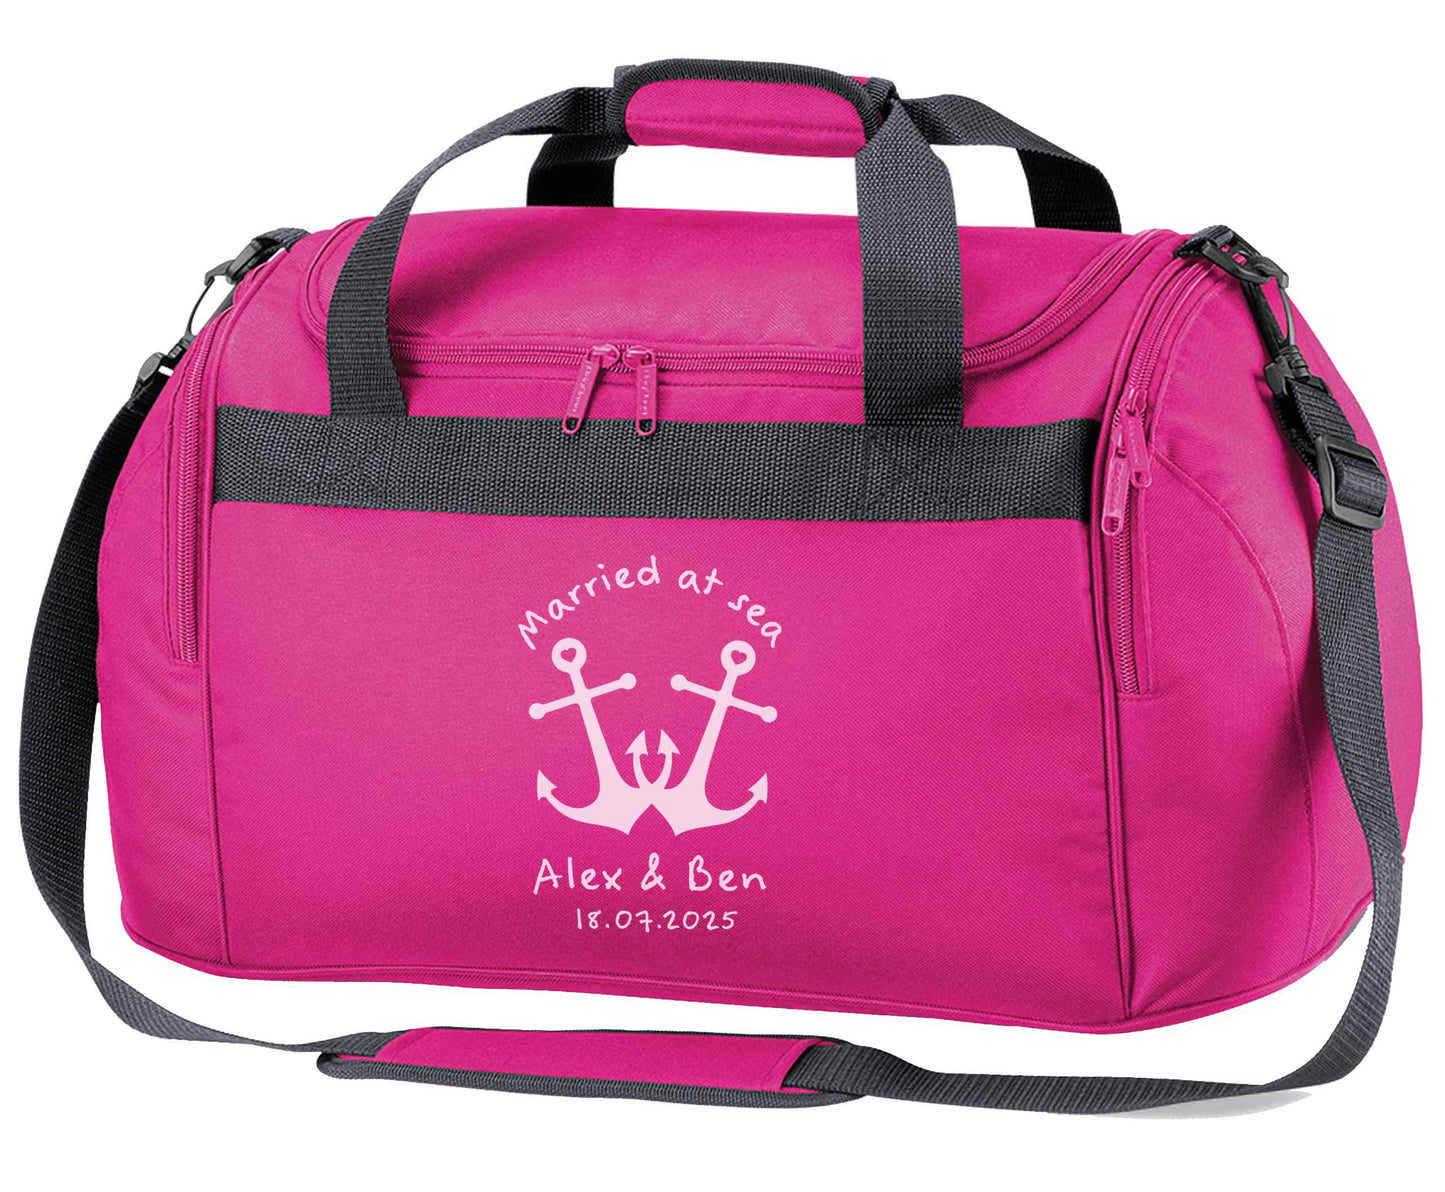 Married at sea blue anchors pink holdall / duffel bag